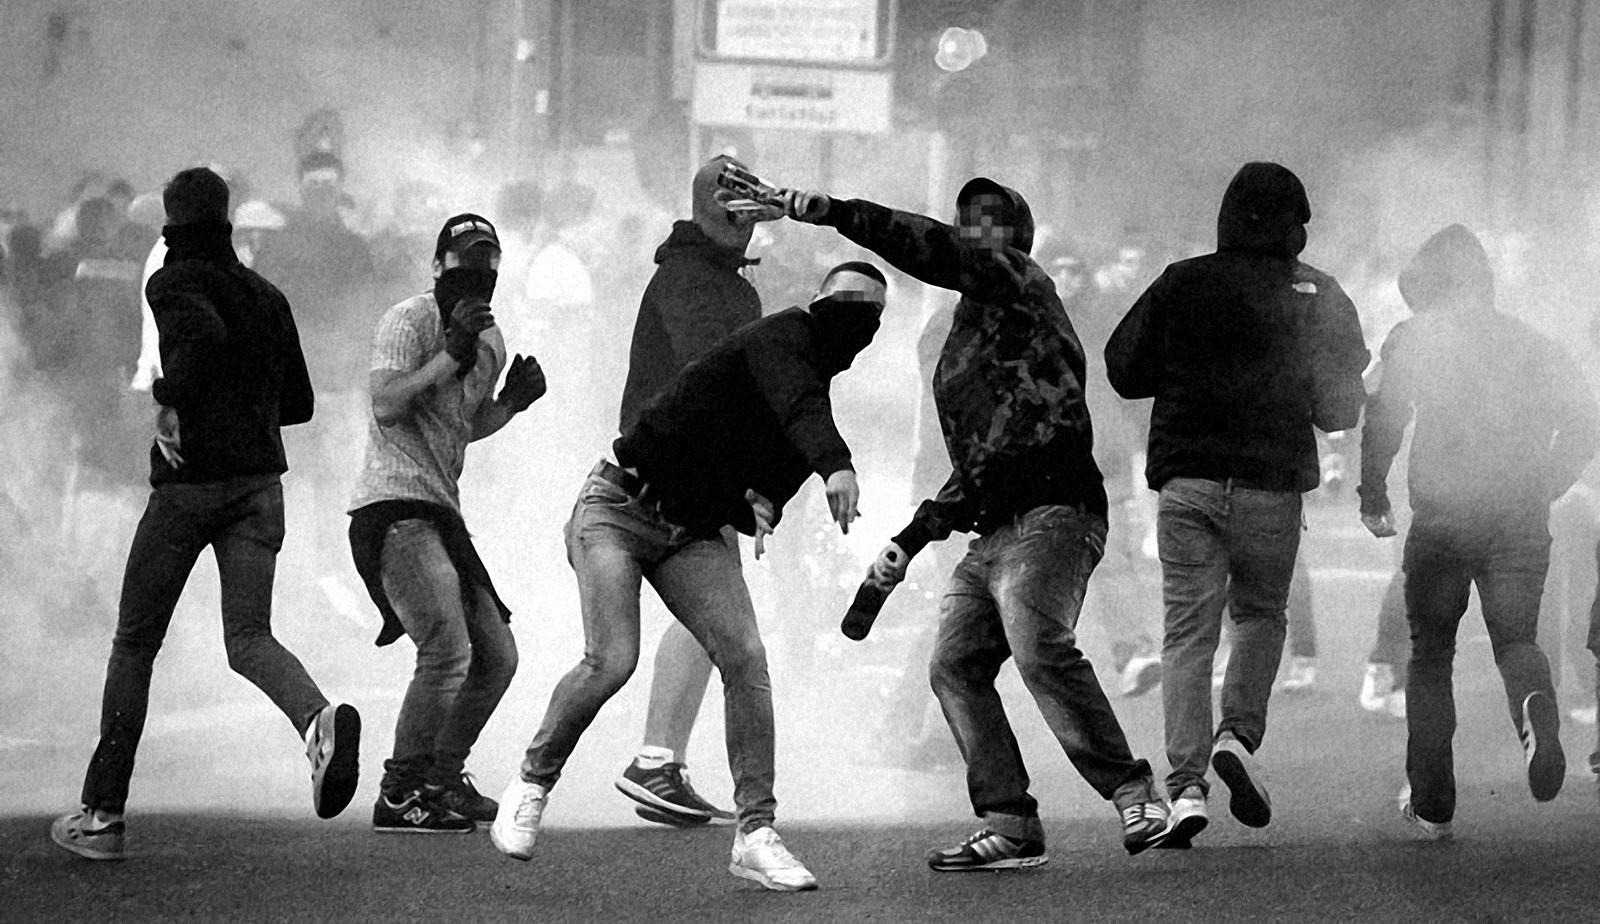 Wallpaper, people, street, road, riots, photograph, dance, crowd, choreography, black and white, monochrome photography, performance art, social group 1600x924